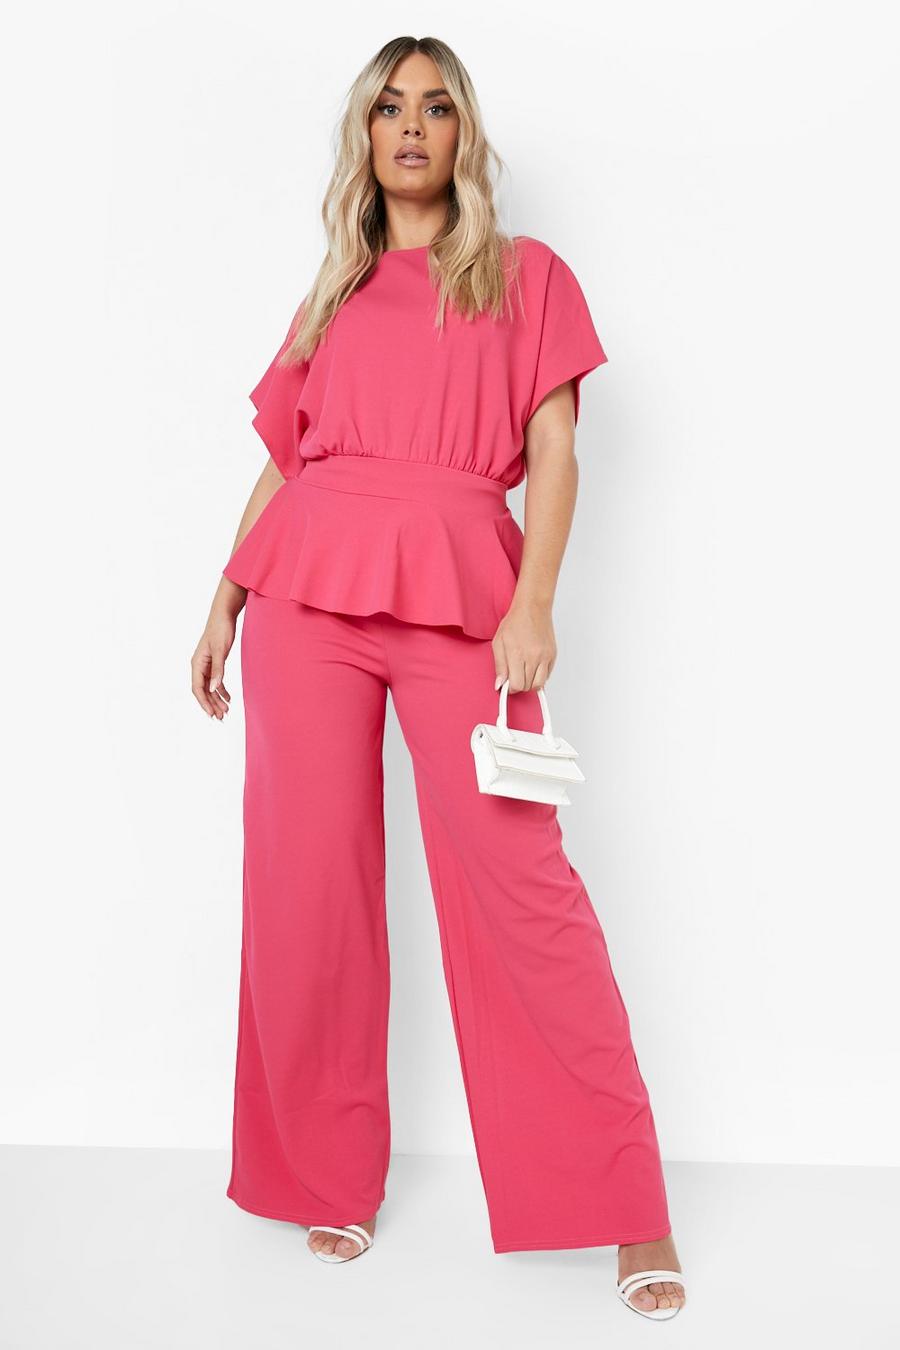 Hot pink Plus Peplum Tie And Wide Leg Trouser Co-ord